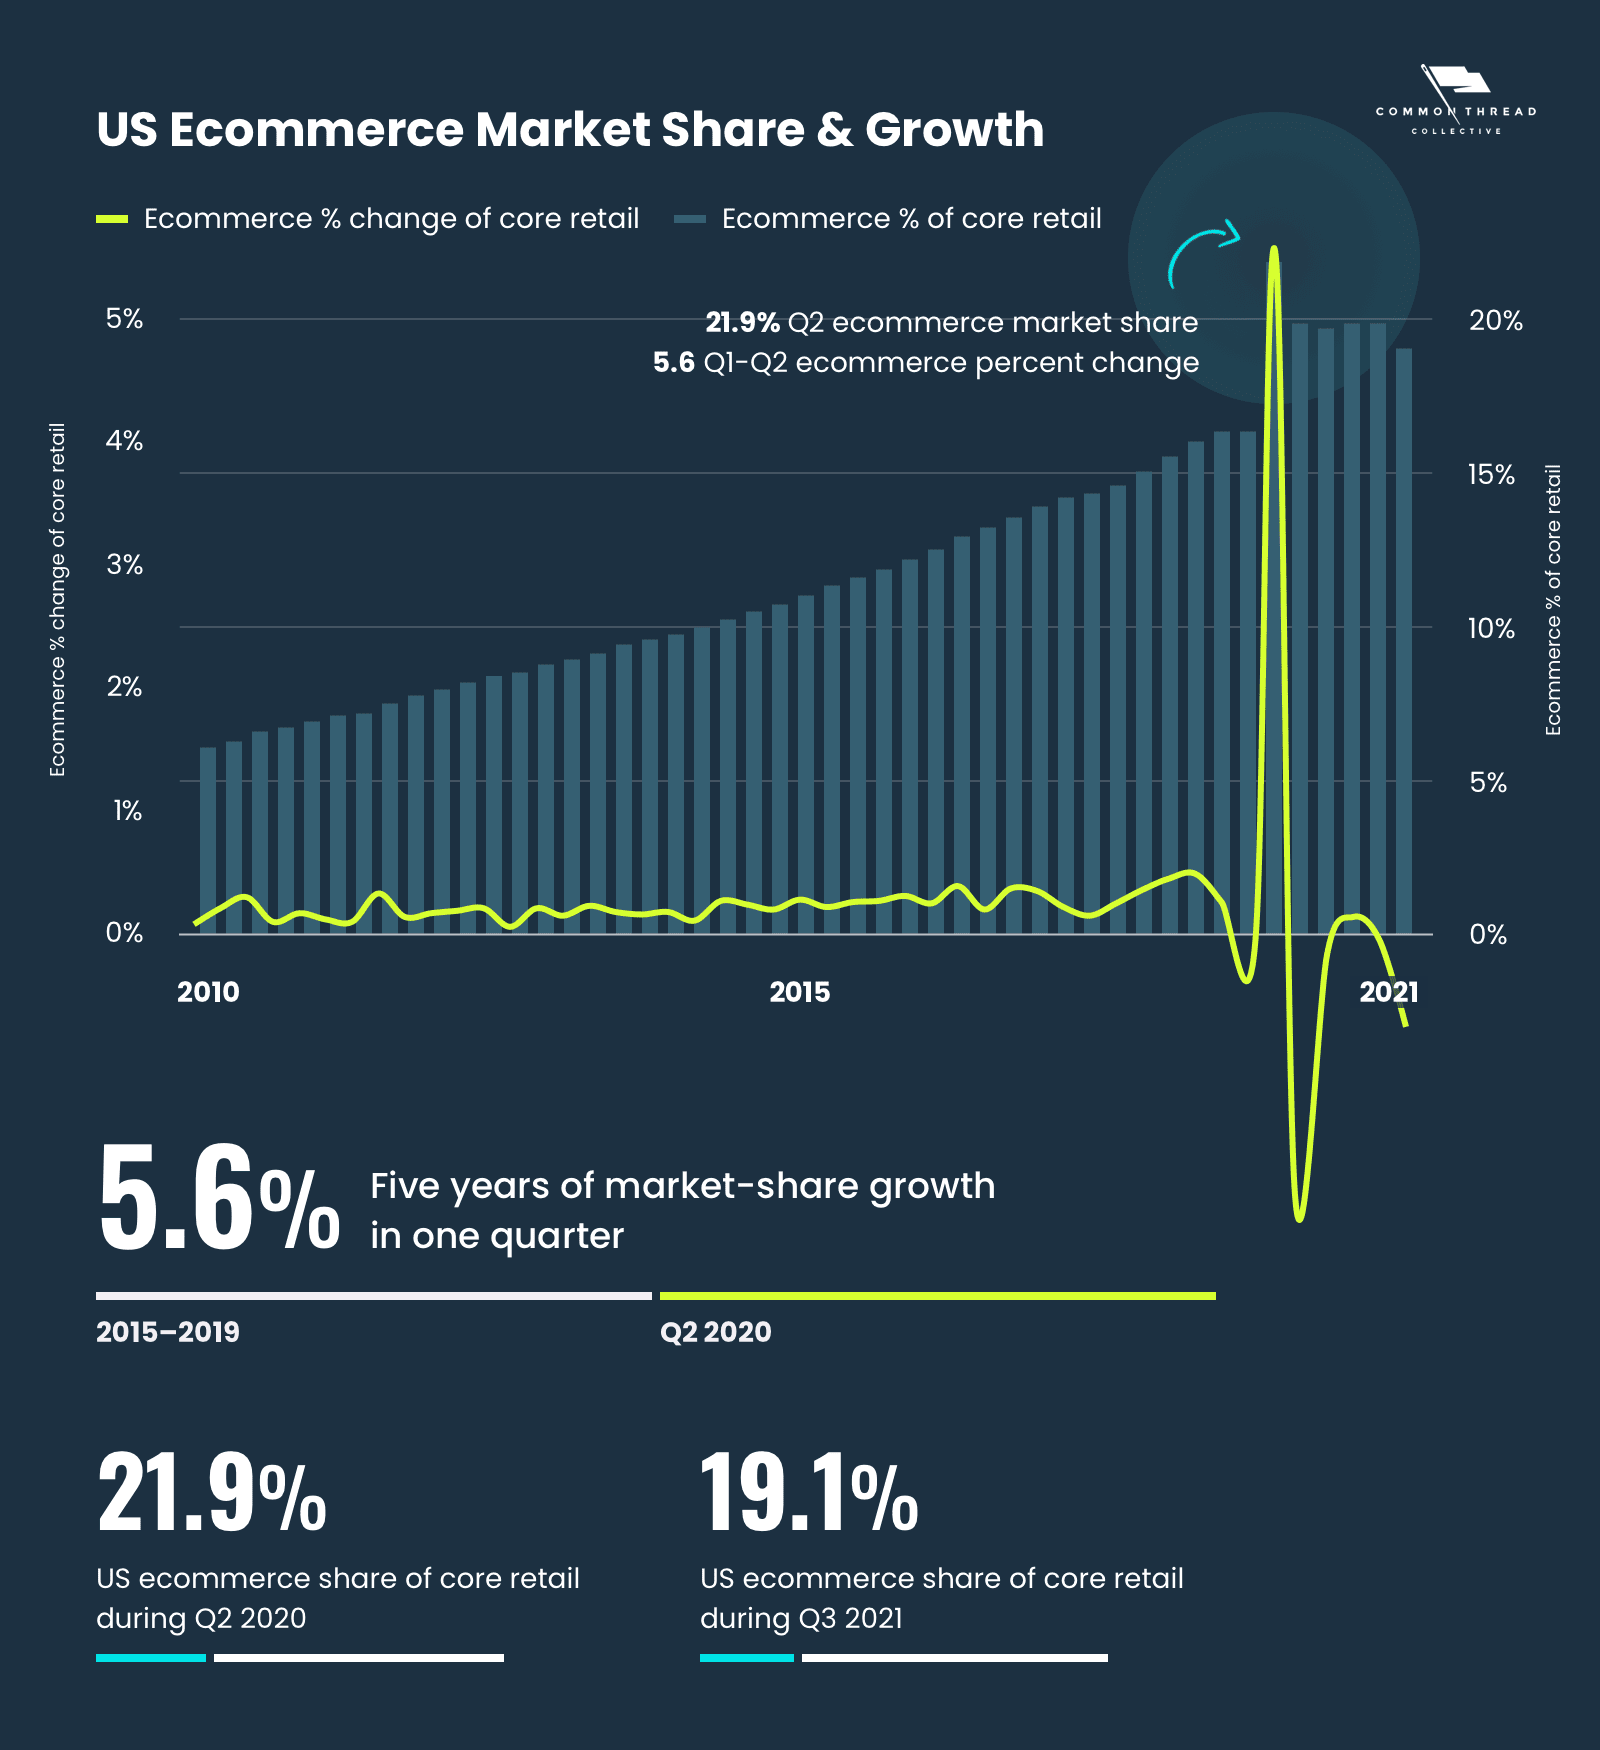 https://cdn.shopify.com/s/files/1/1024/1659/files/US_Ecommerce_Market_Share_Growth_2022.png?v=1643490907